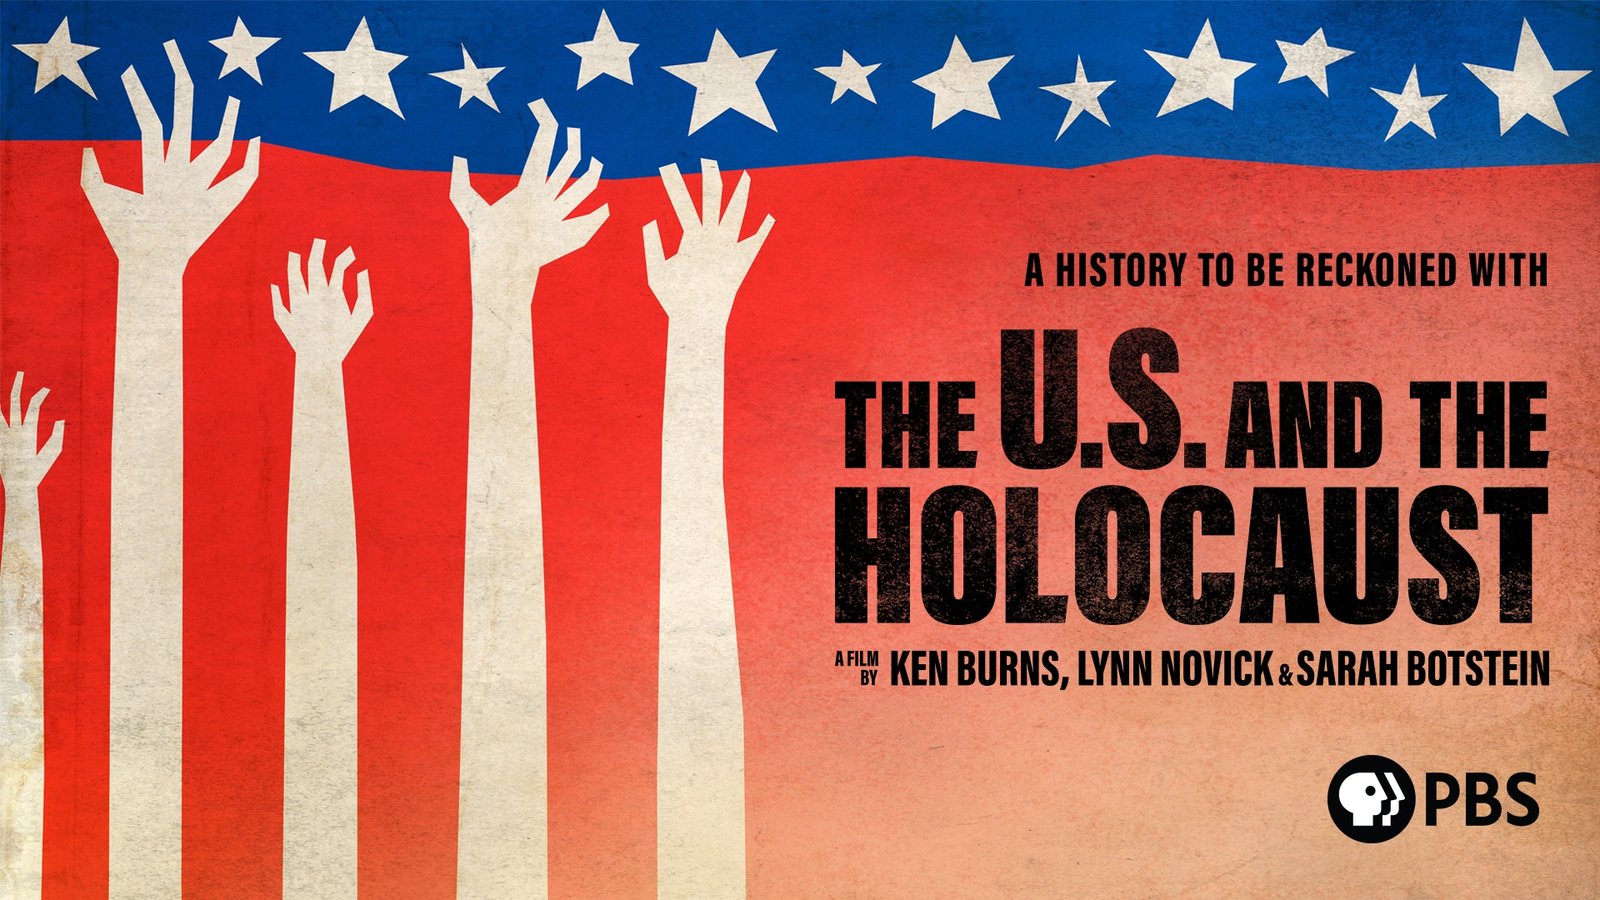 The U.S. and the Holocaust - A Film by Ken Burns